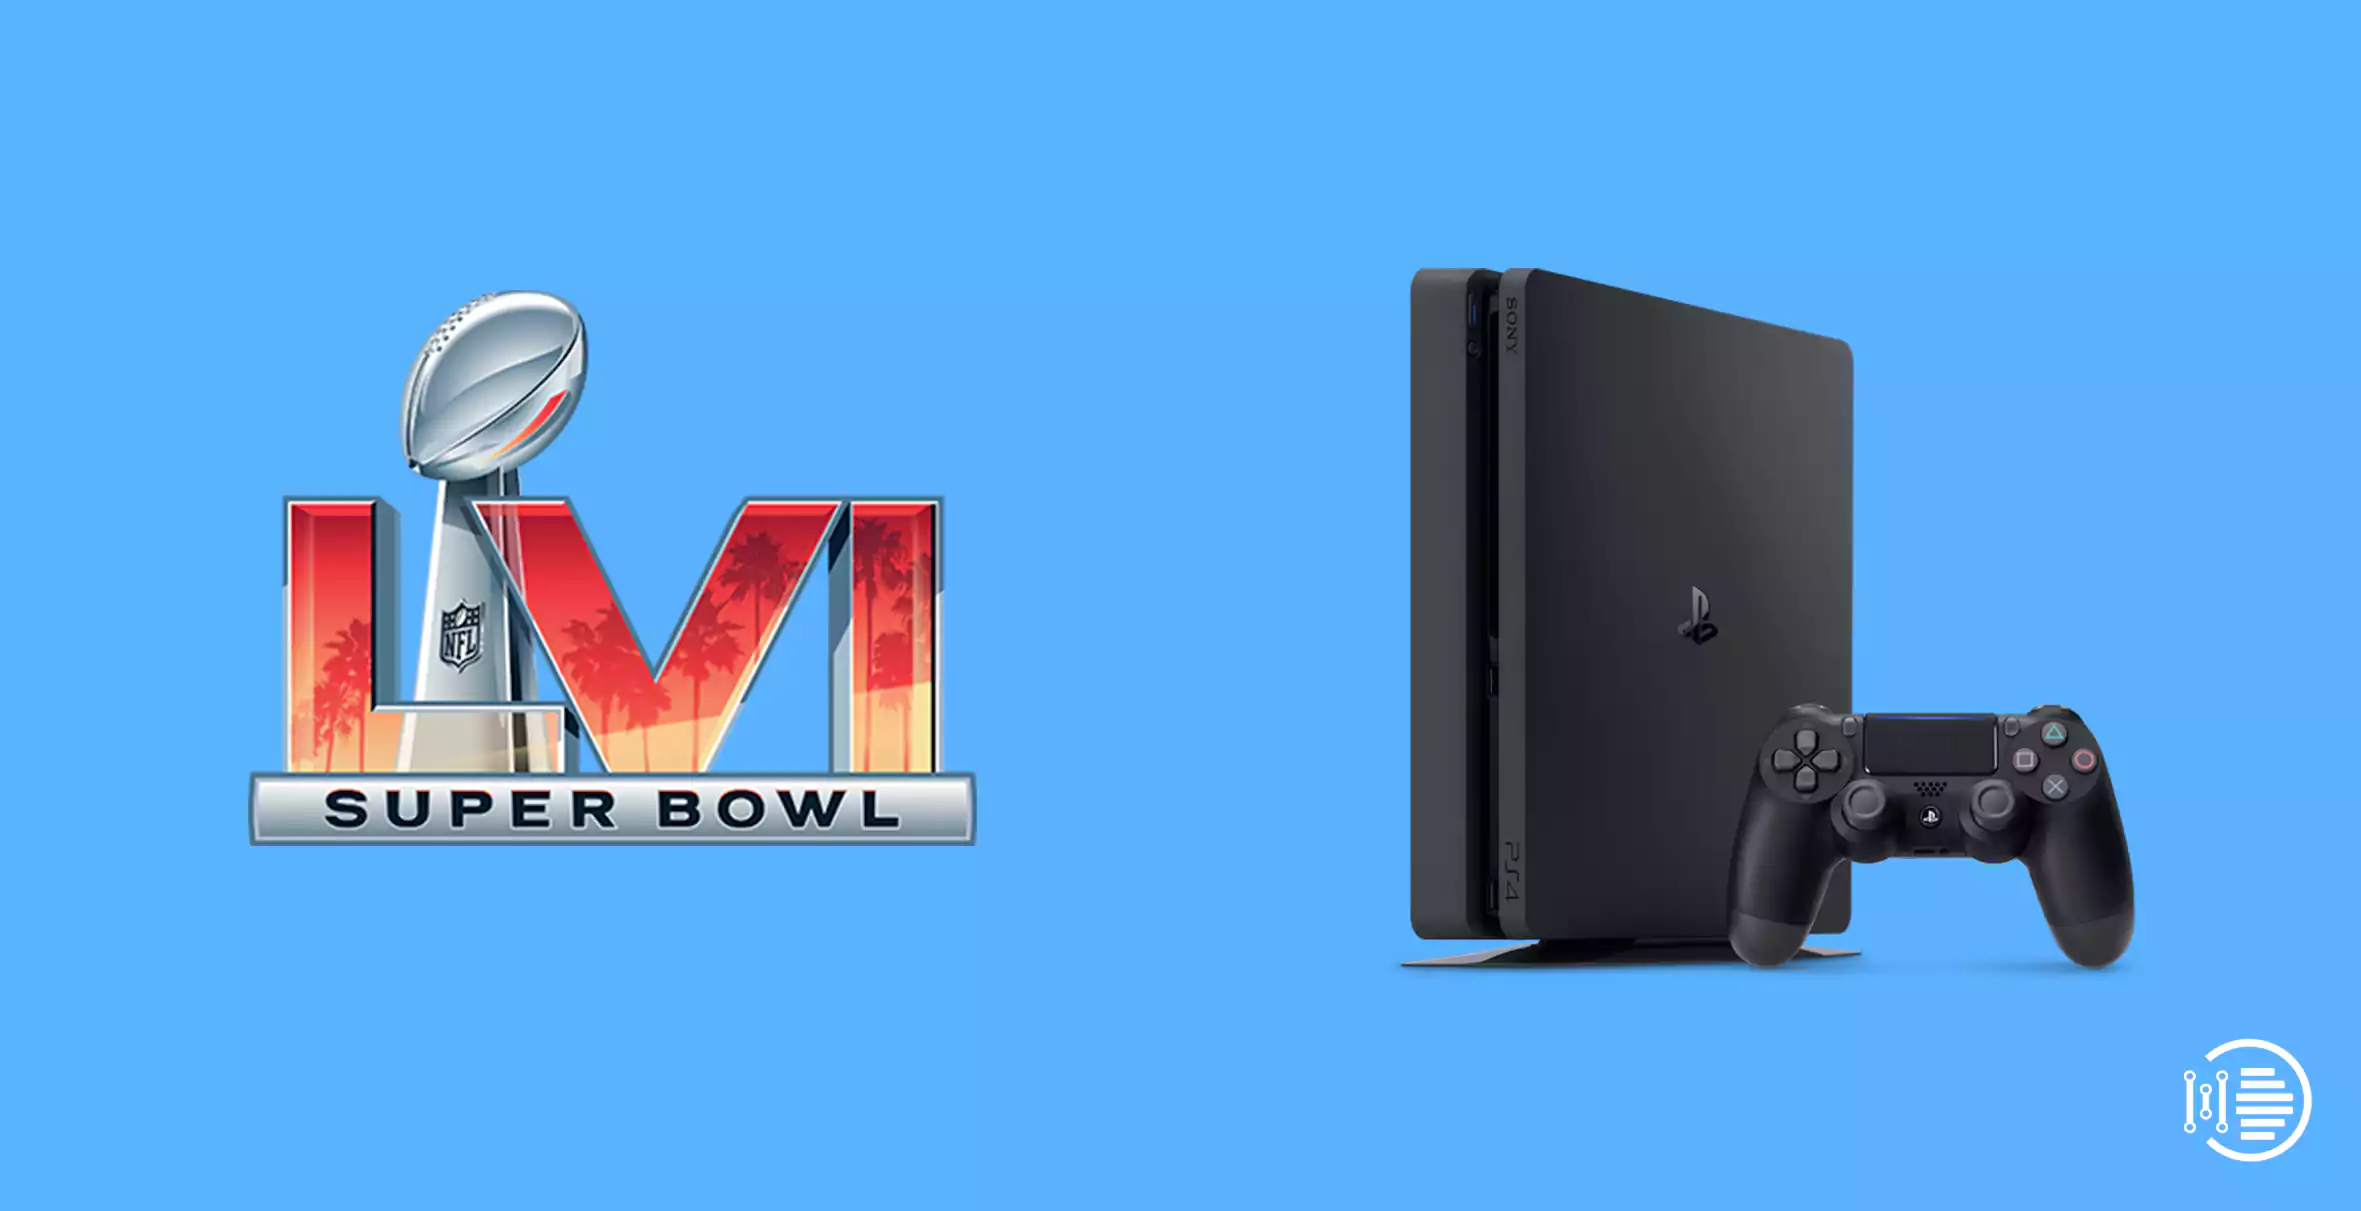 How to Watch Super Bowl 2022 on PS4